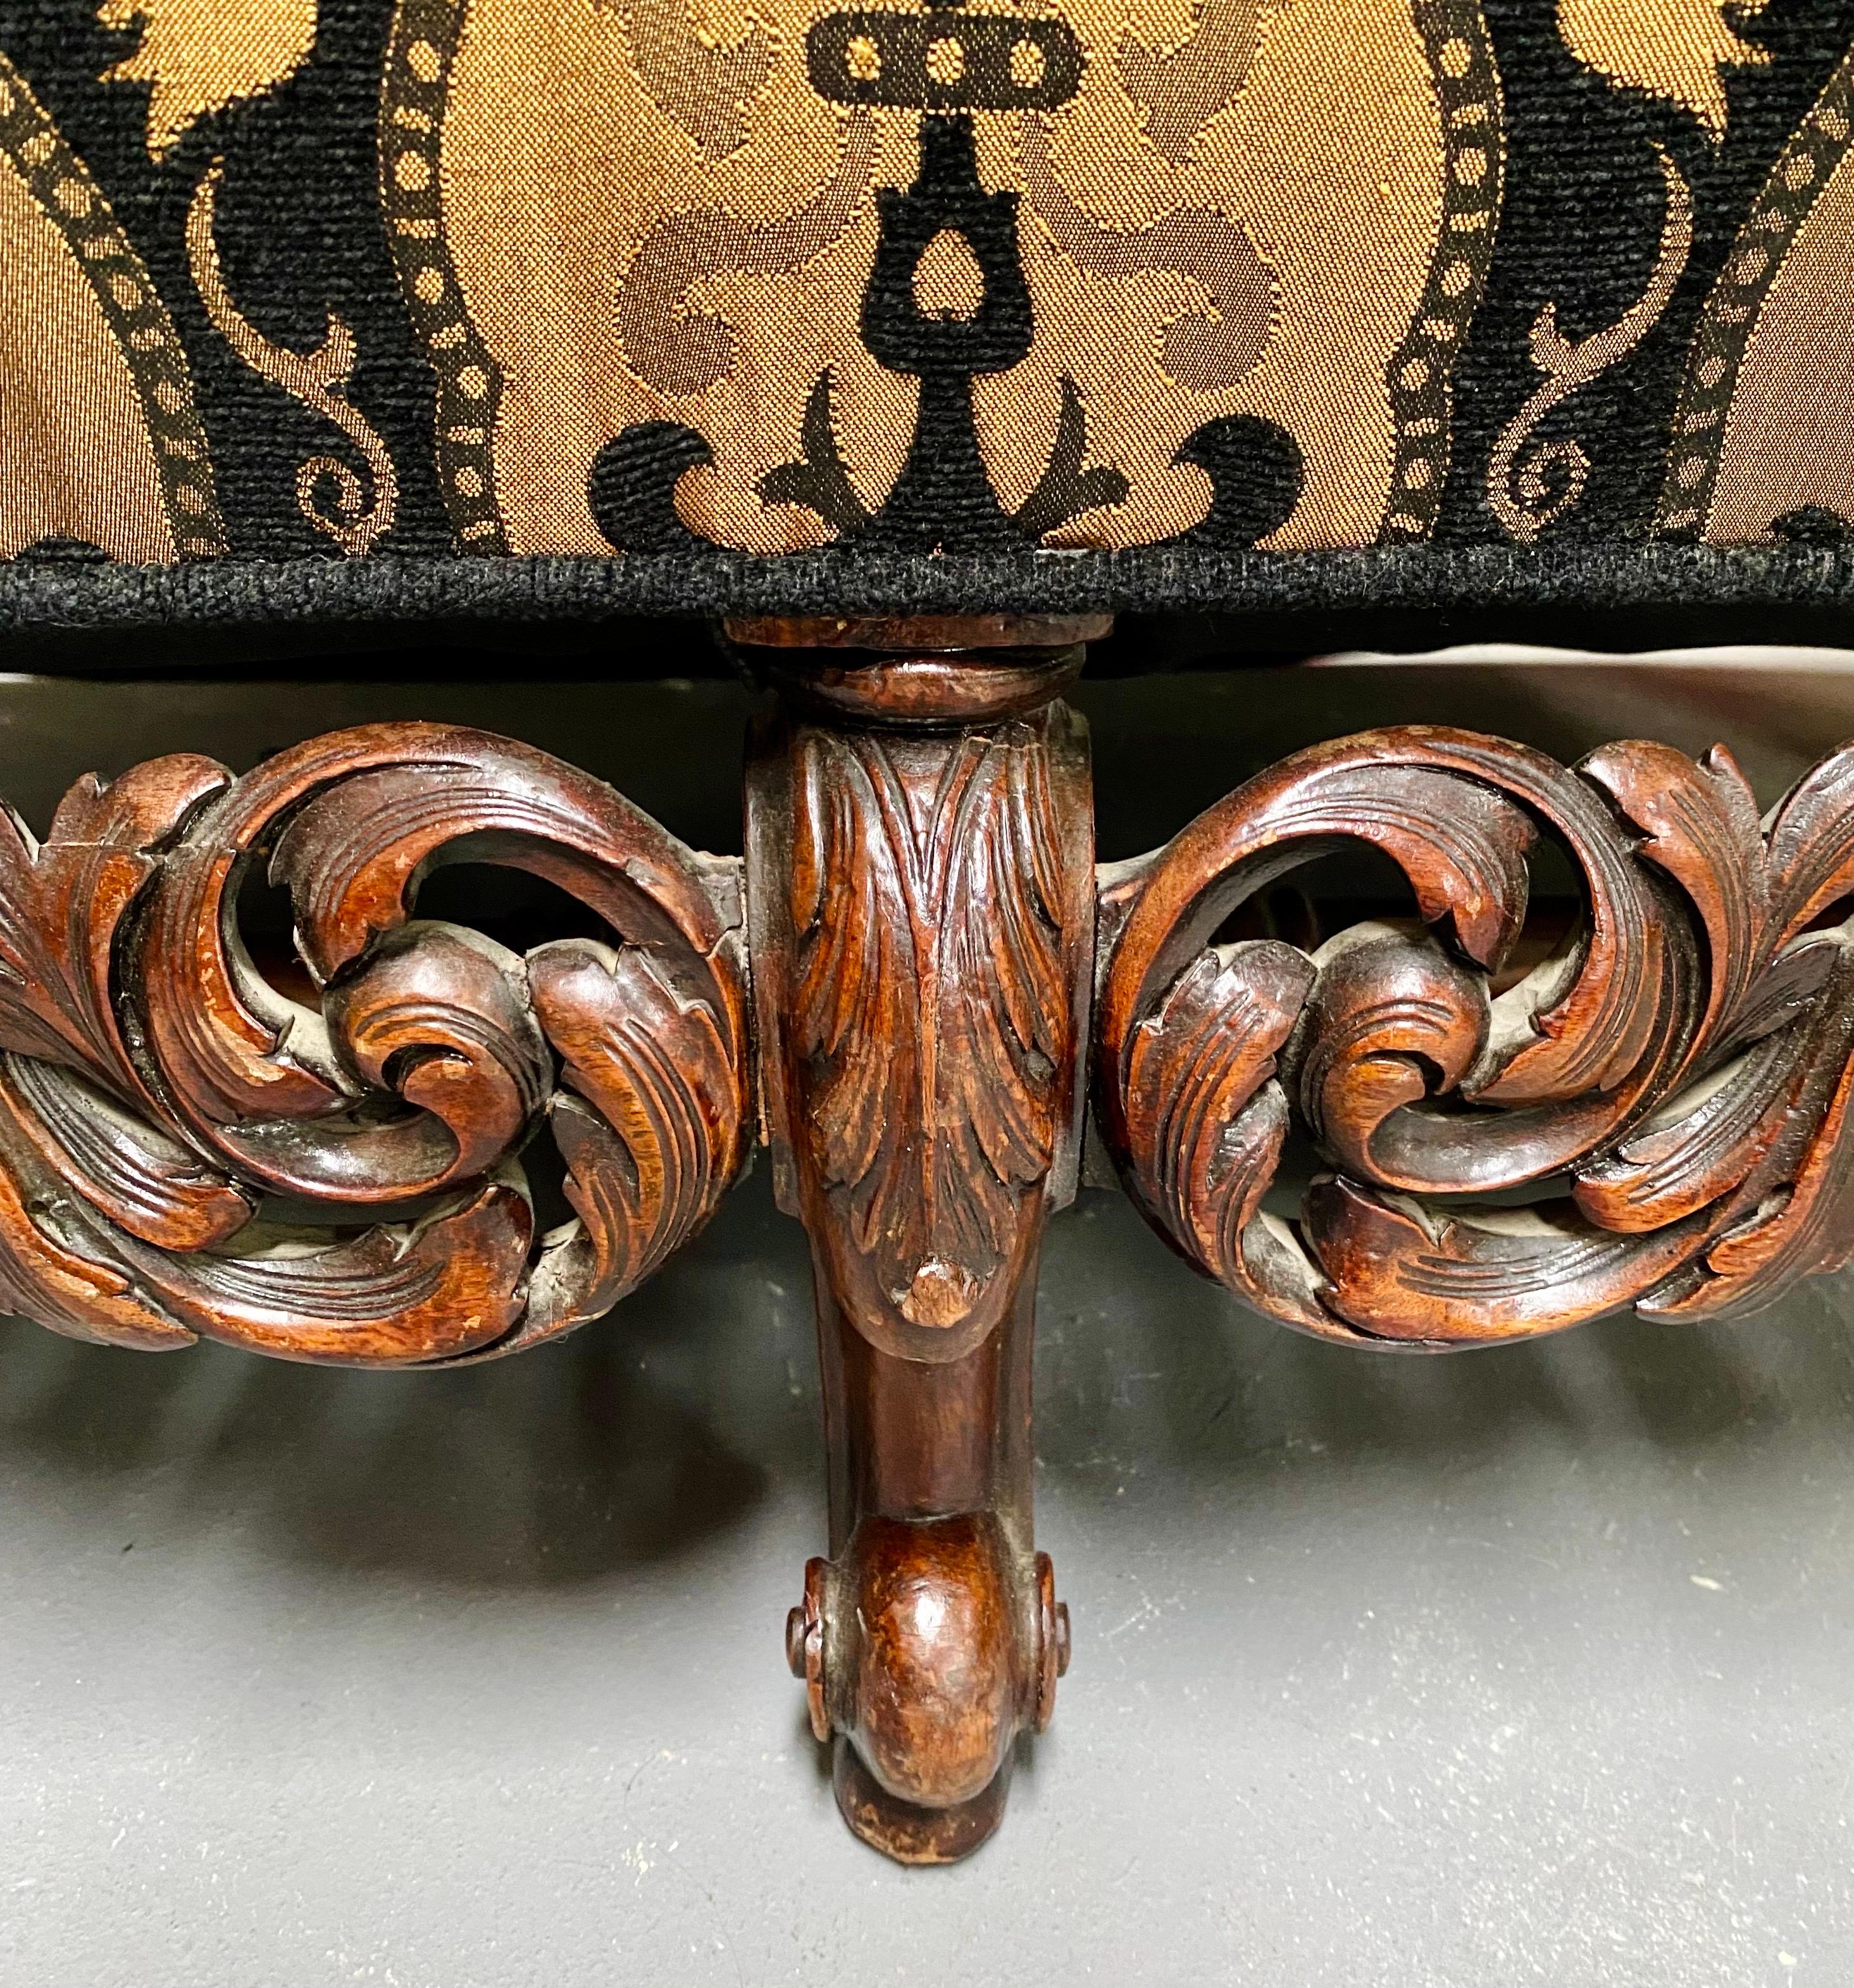 Italian Rococo Revival Style Settee or Sofa with Heraldic Motif in Black & Beige For Sale 3